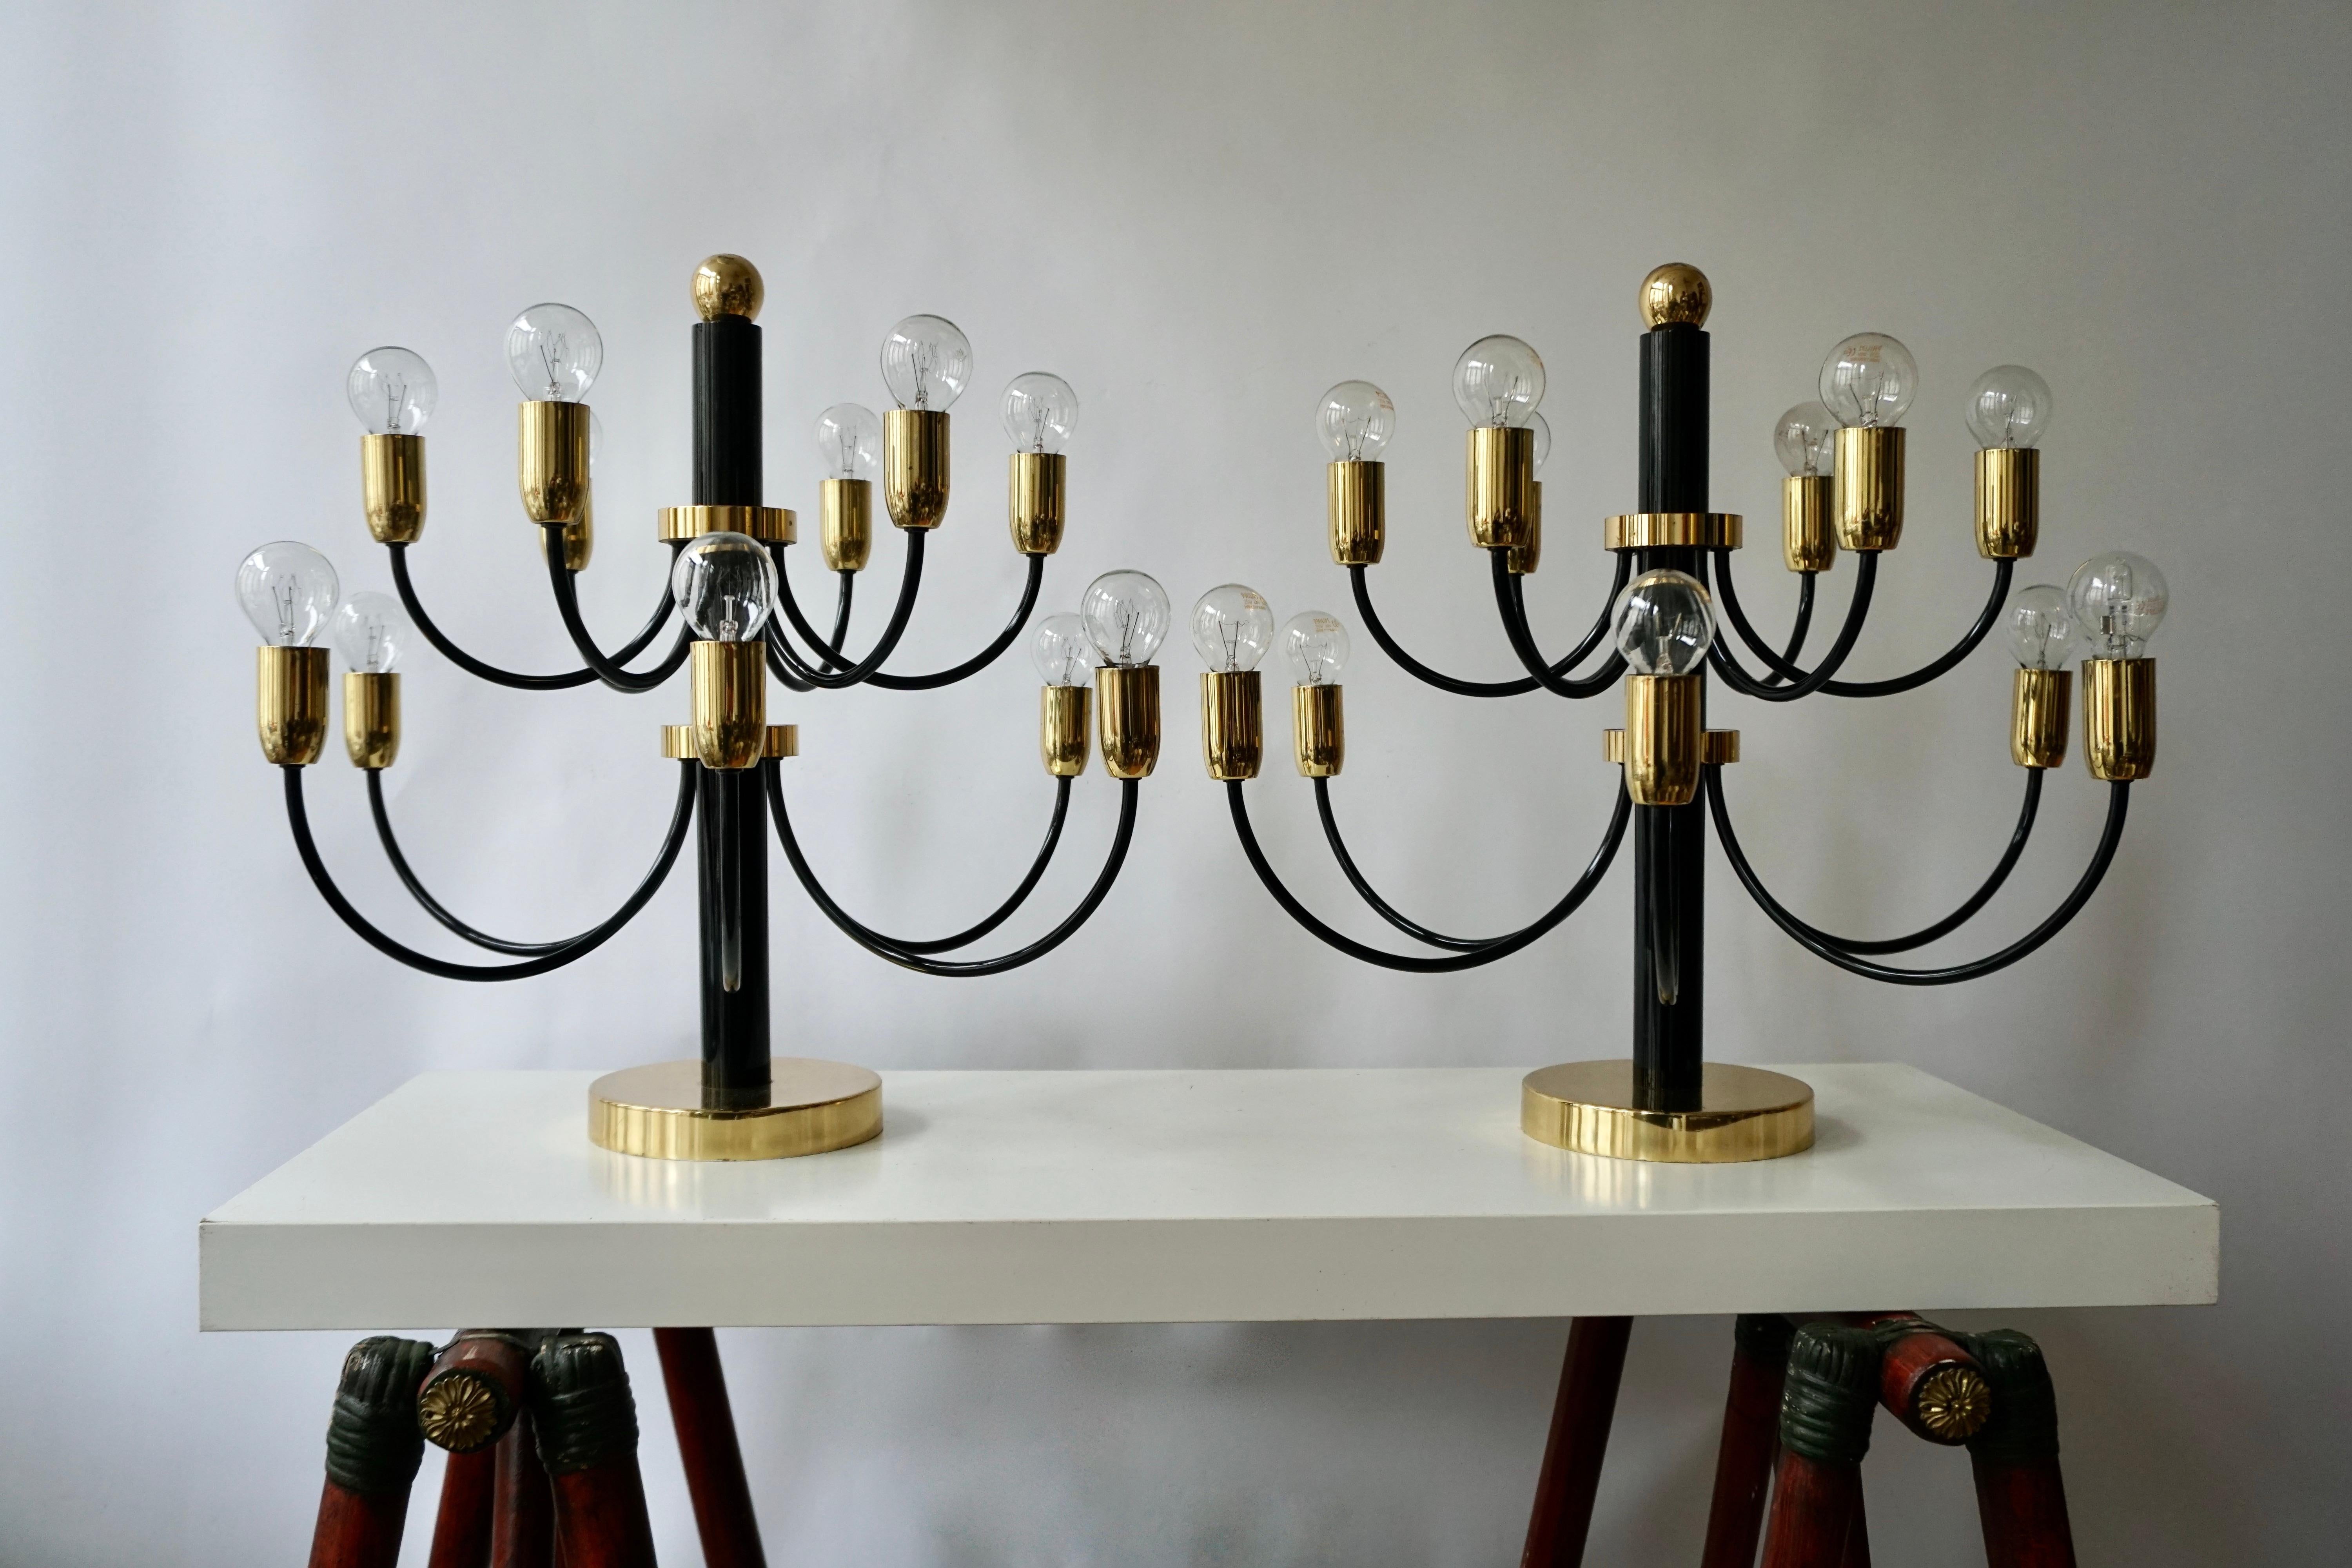 Vintage flushmount 12-light points chandelier by Gaetano Sciolari for Boulanger.
The lamp can also be used as a table lamp
Good condition, tested and ready for use with regular E14 light bulbs.
Italy, 1960s.
Dimensions:
Height 50 cm.
Diameter